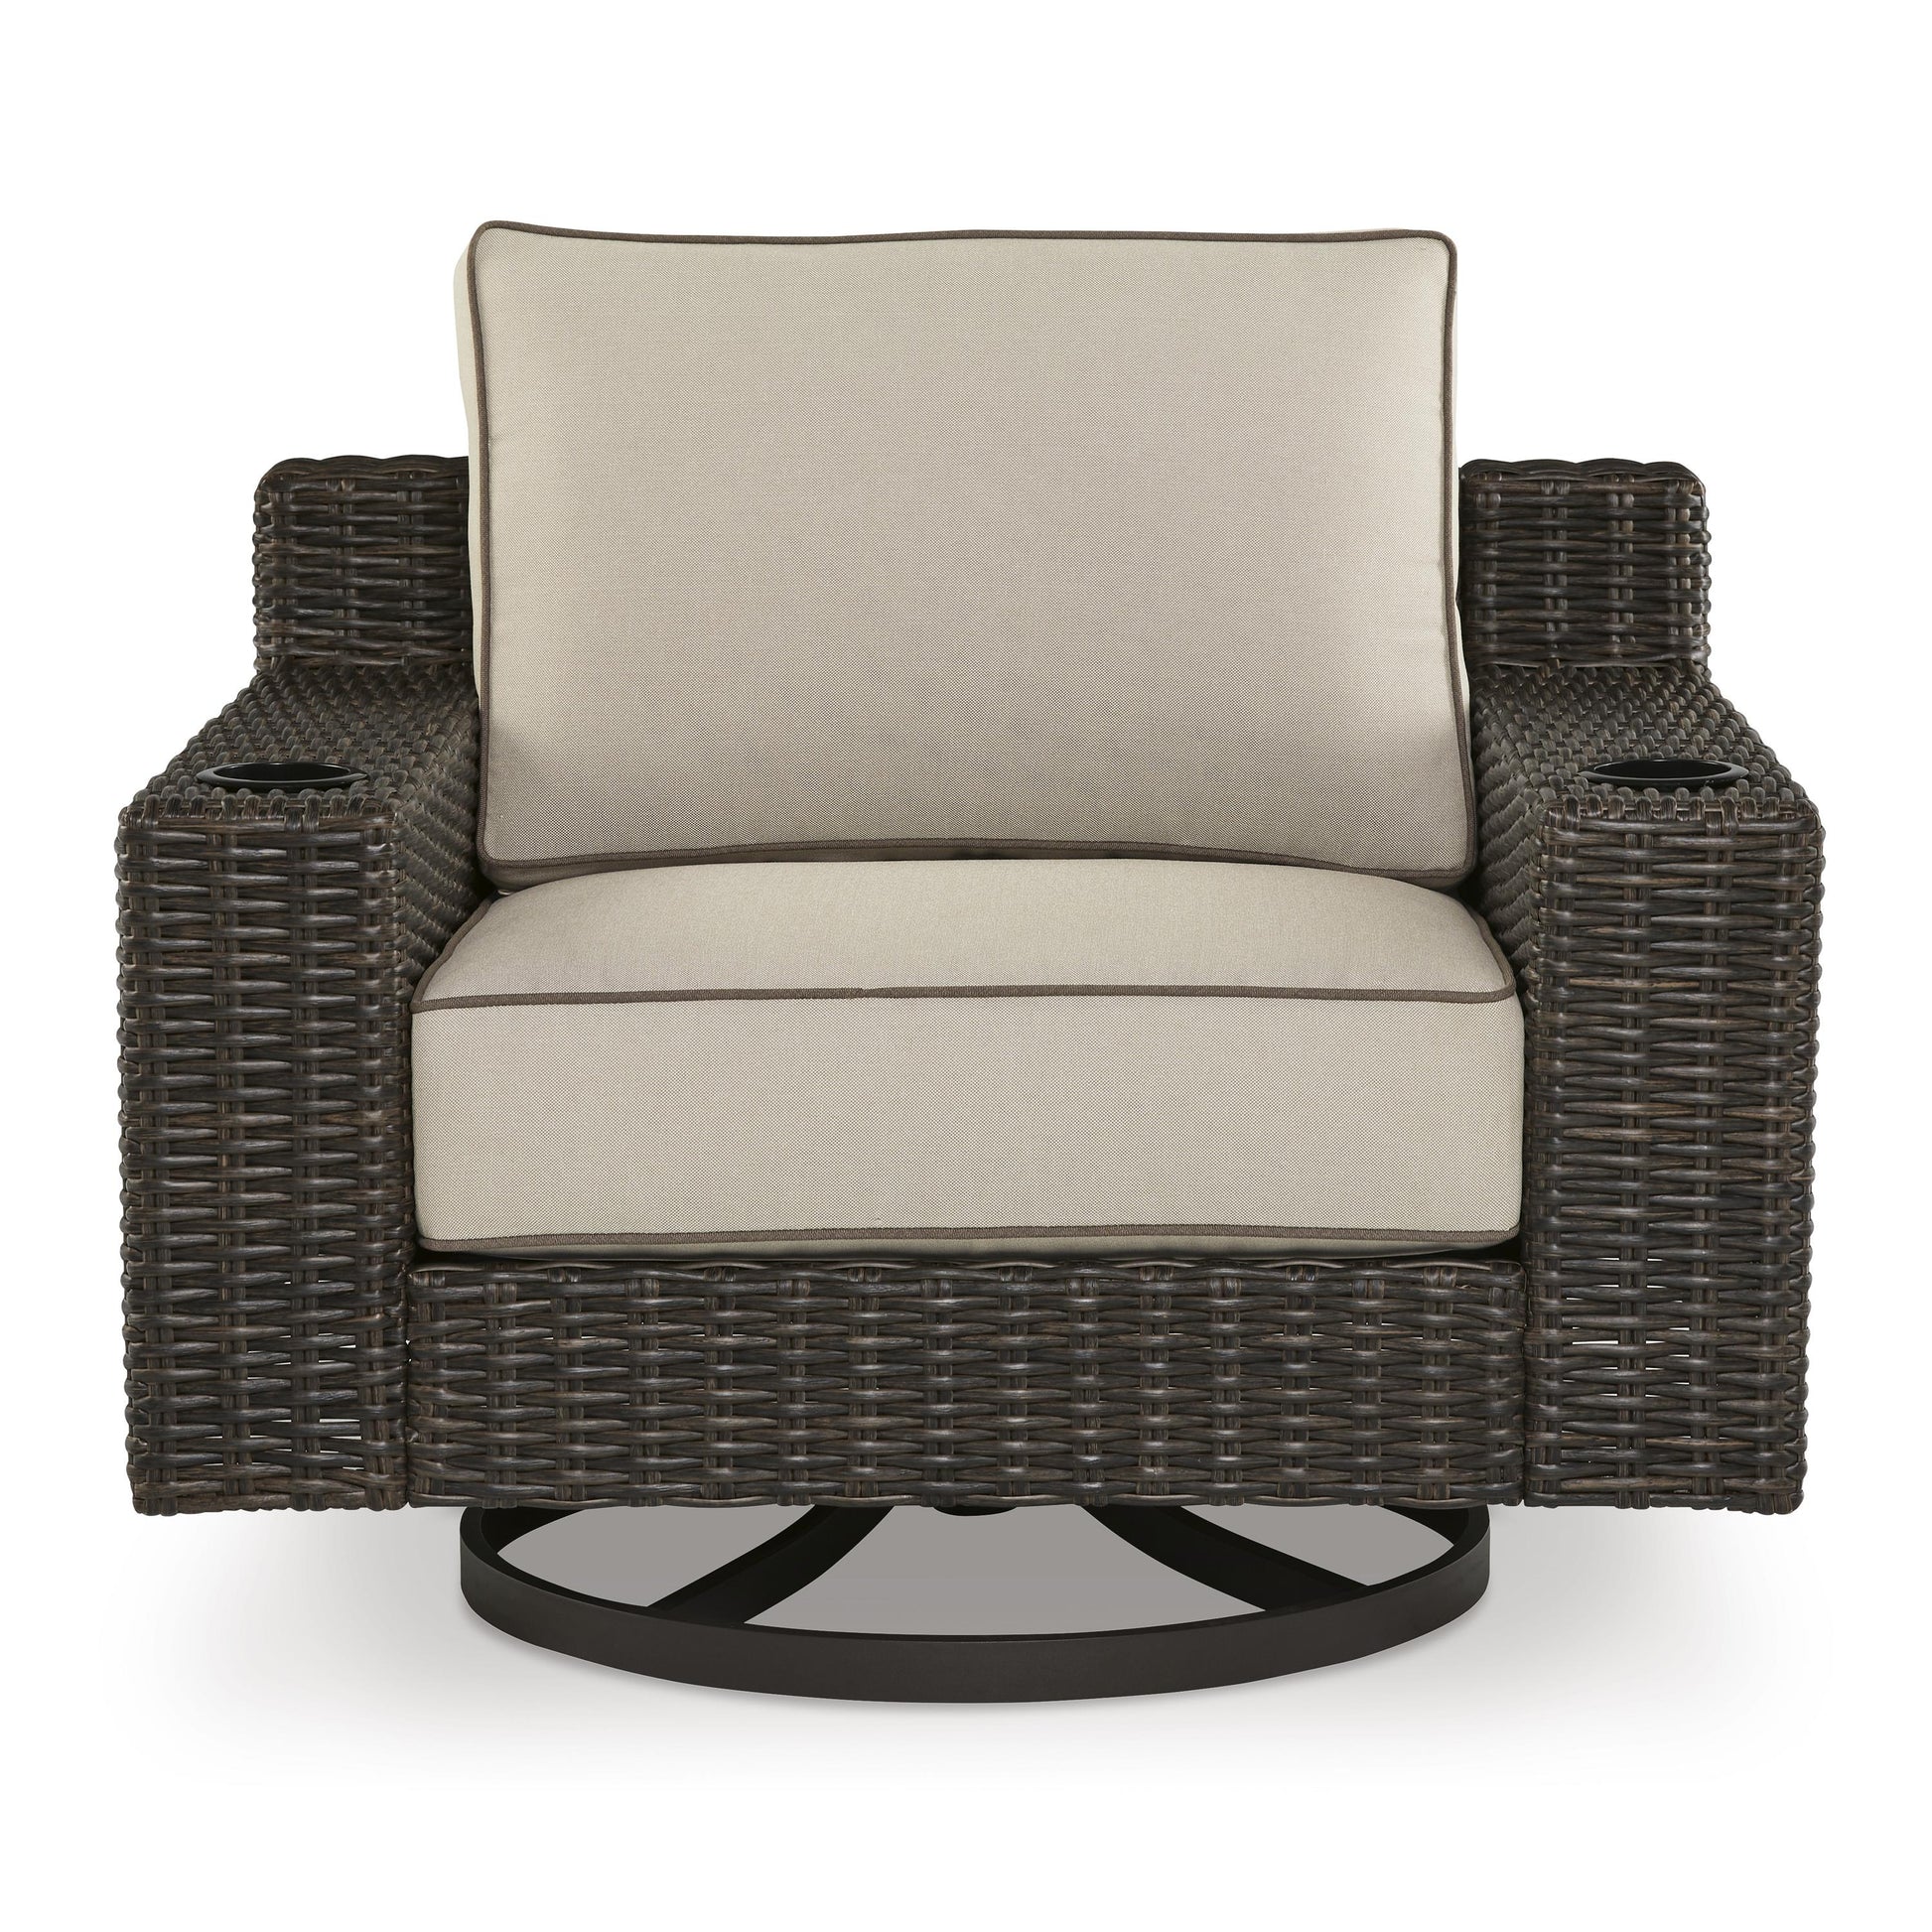 Signature Design by Ashley Outdoor Seating Lounge Chairs P784-821 IMAGE 2